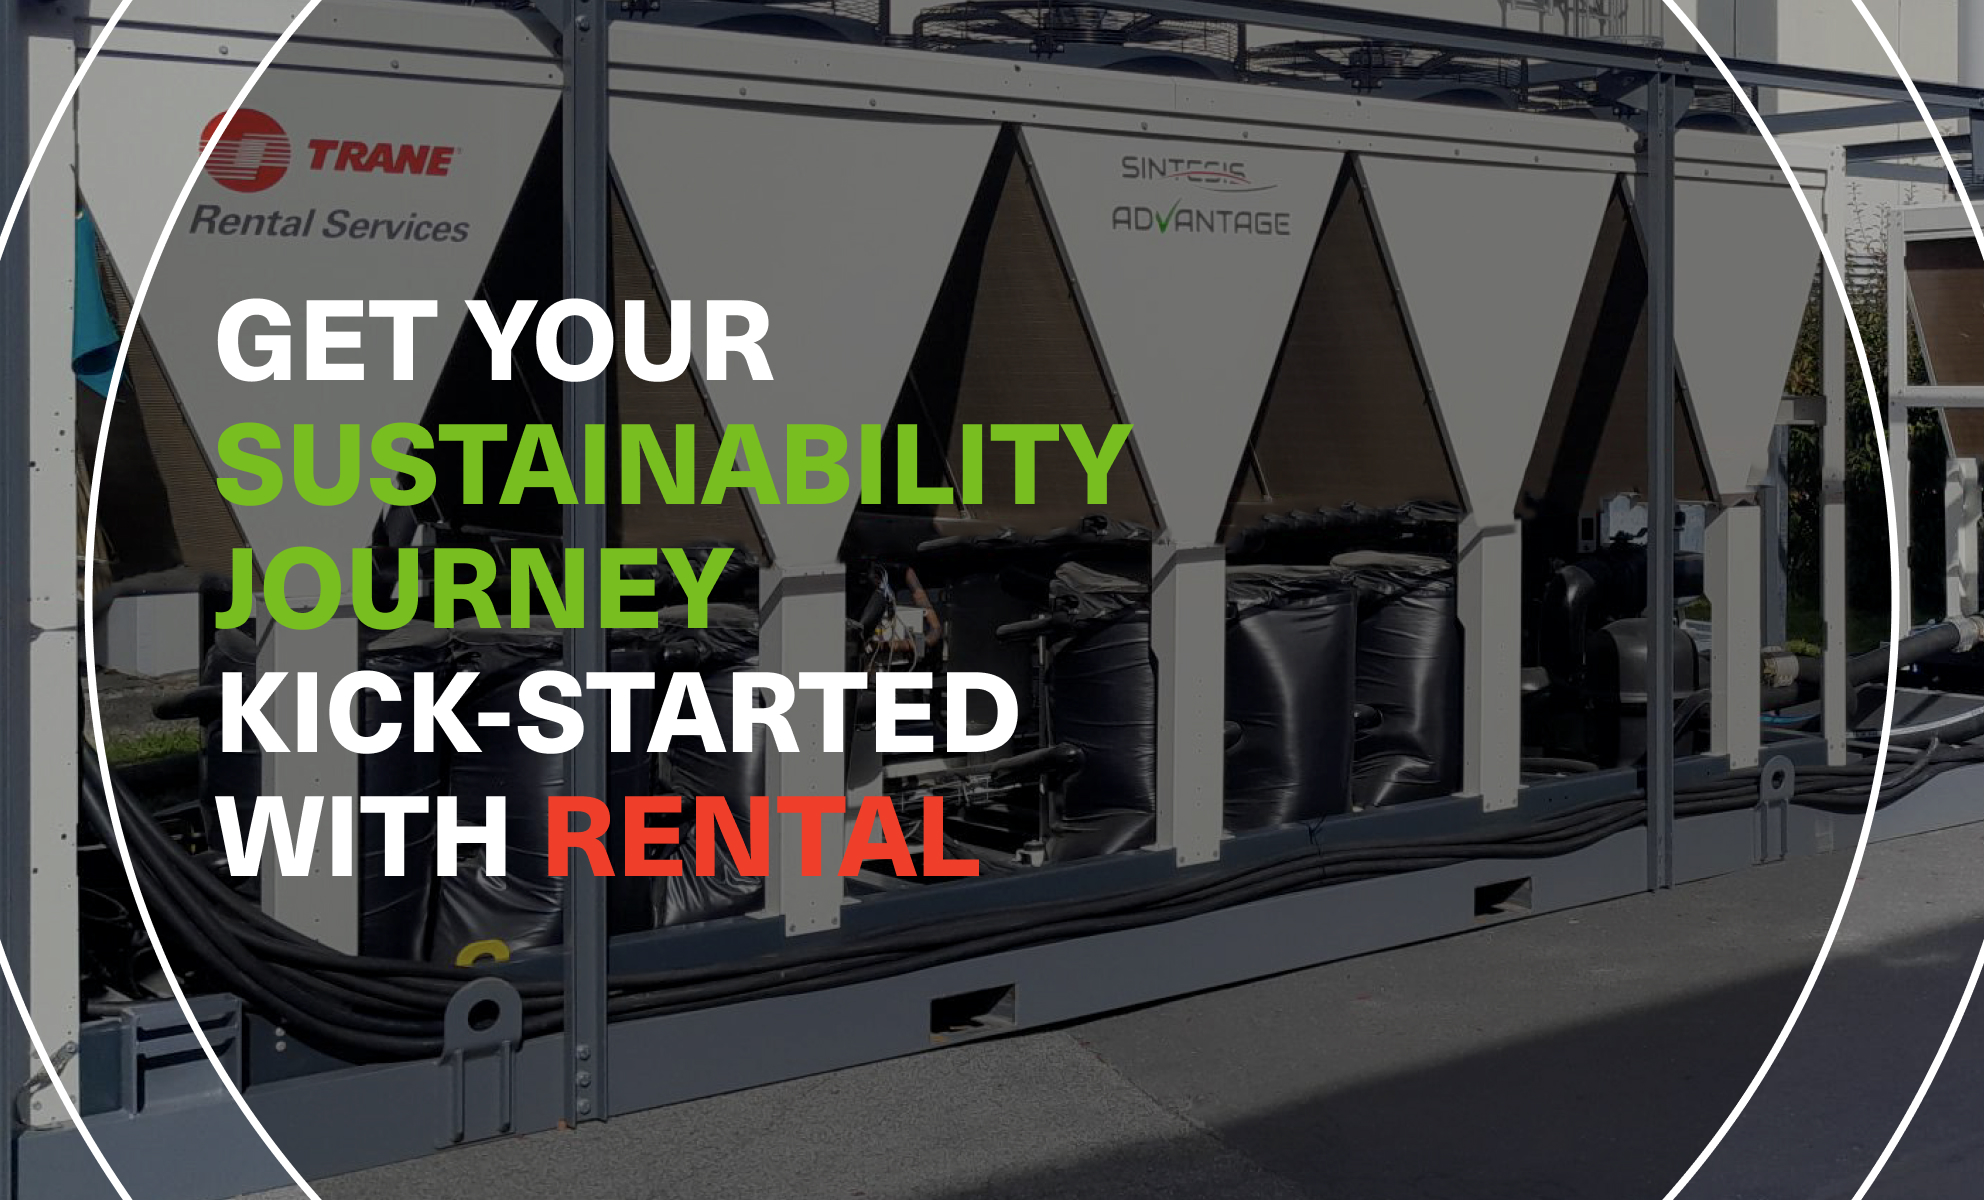 Get your sustainability journey kick-started with rental